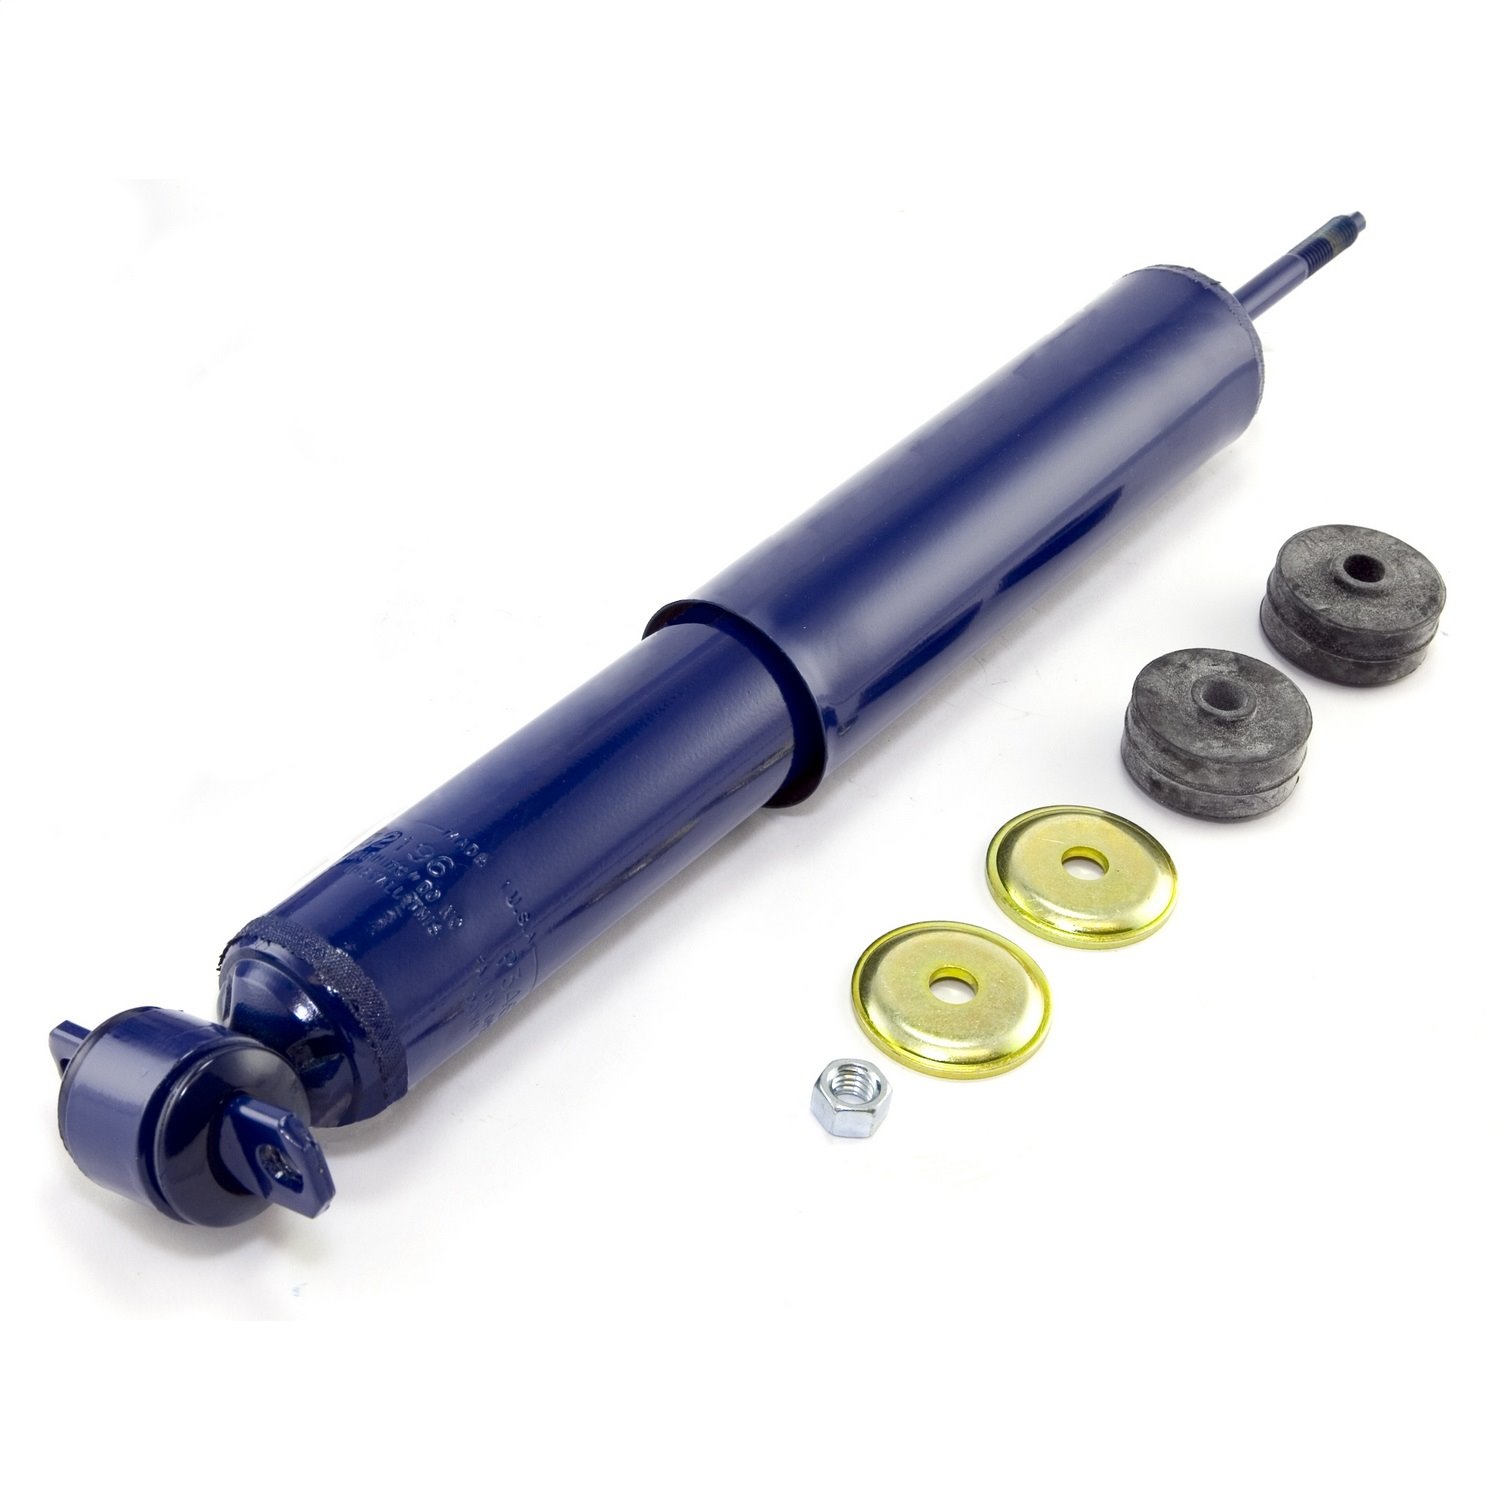 Replacement front shock absorber from Omix-ADA, Fits 97-01 Jeep Wrangler TJ